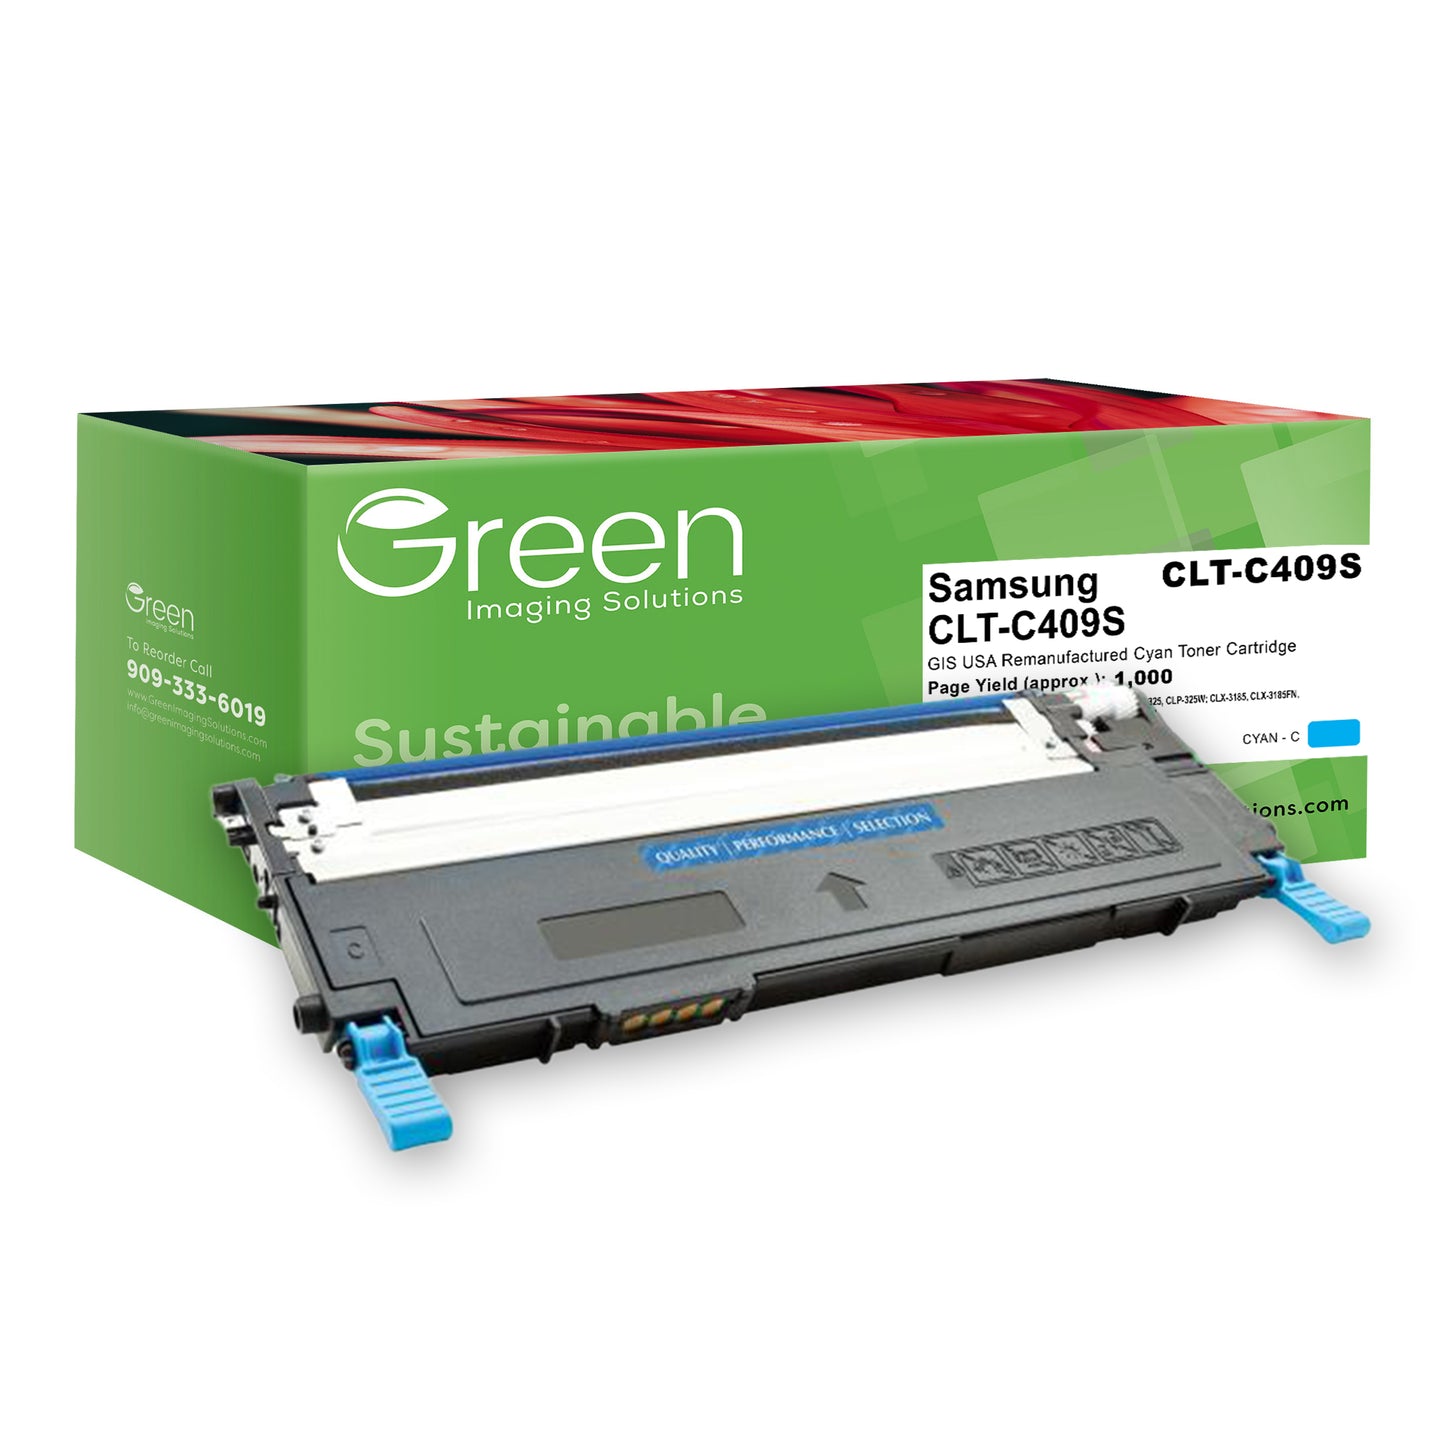 Green Imaging Solutions USA Remanufactured Cyan Toner Cartridge for Samsung CLT-C409S